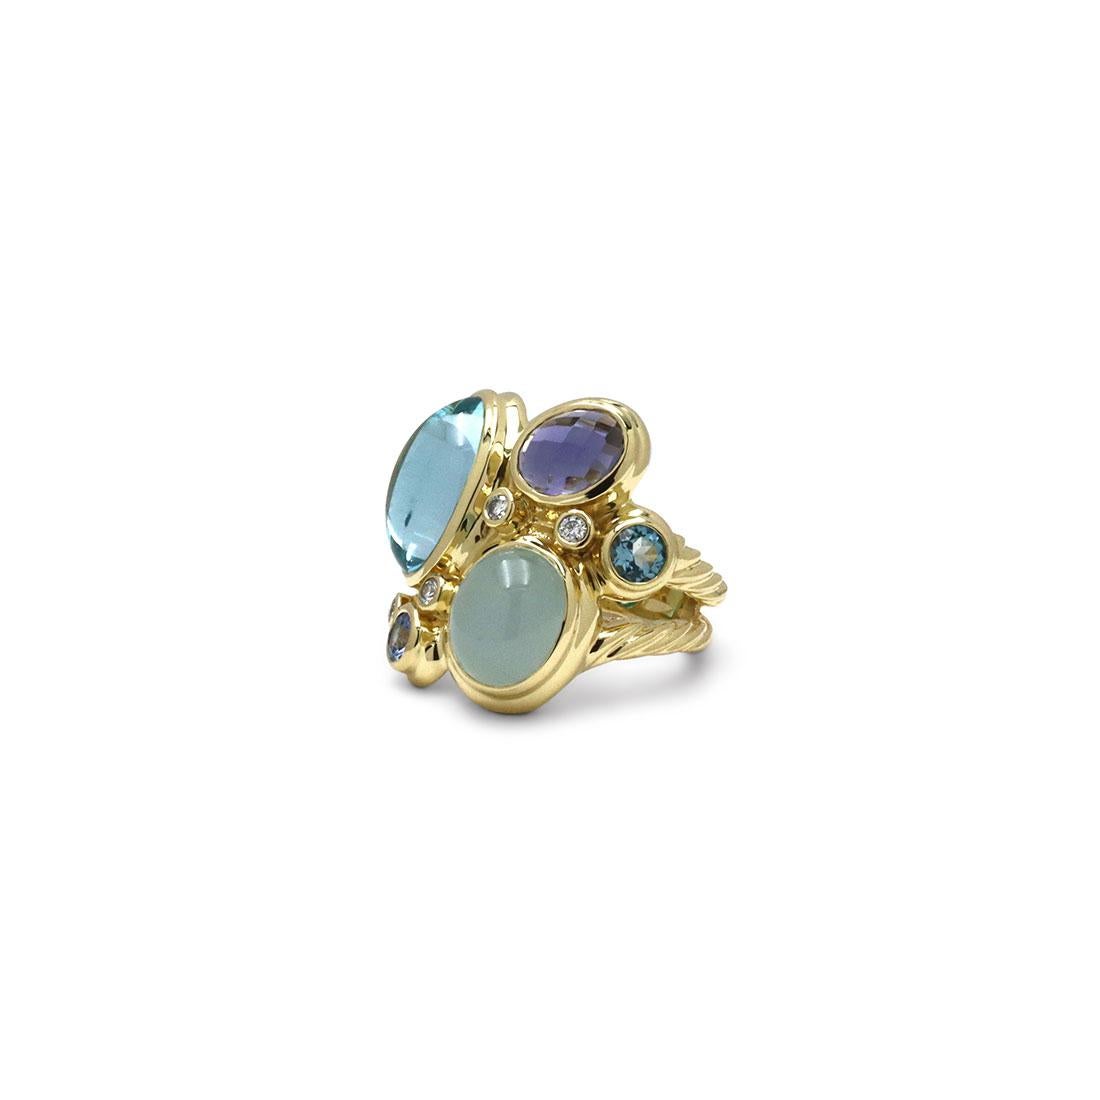 Authentic David Yurman Mosaic ring crafted in 18 karat yellow gold. Set with cabochon blue topaz and milky aquamarine, faceted iolite, London blue topaz and blue sapphire and accented by 4 round brilliant cut diamonds weighing an estimated 0.15